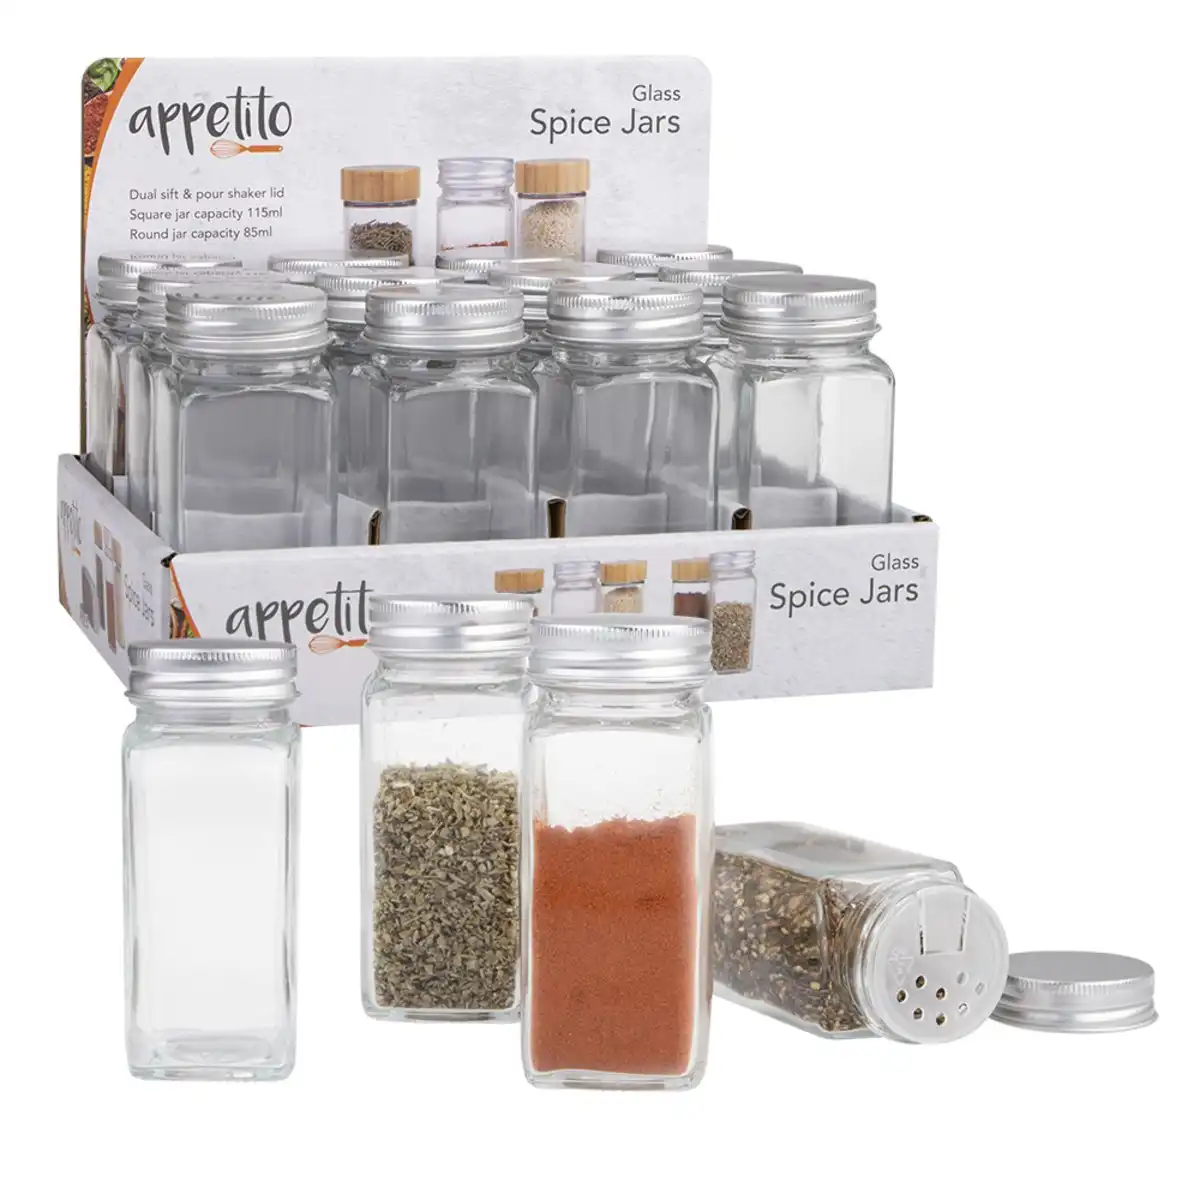 Appetito GLASS SQUARE SPICE JAR WITH METAL LID - Set of 6